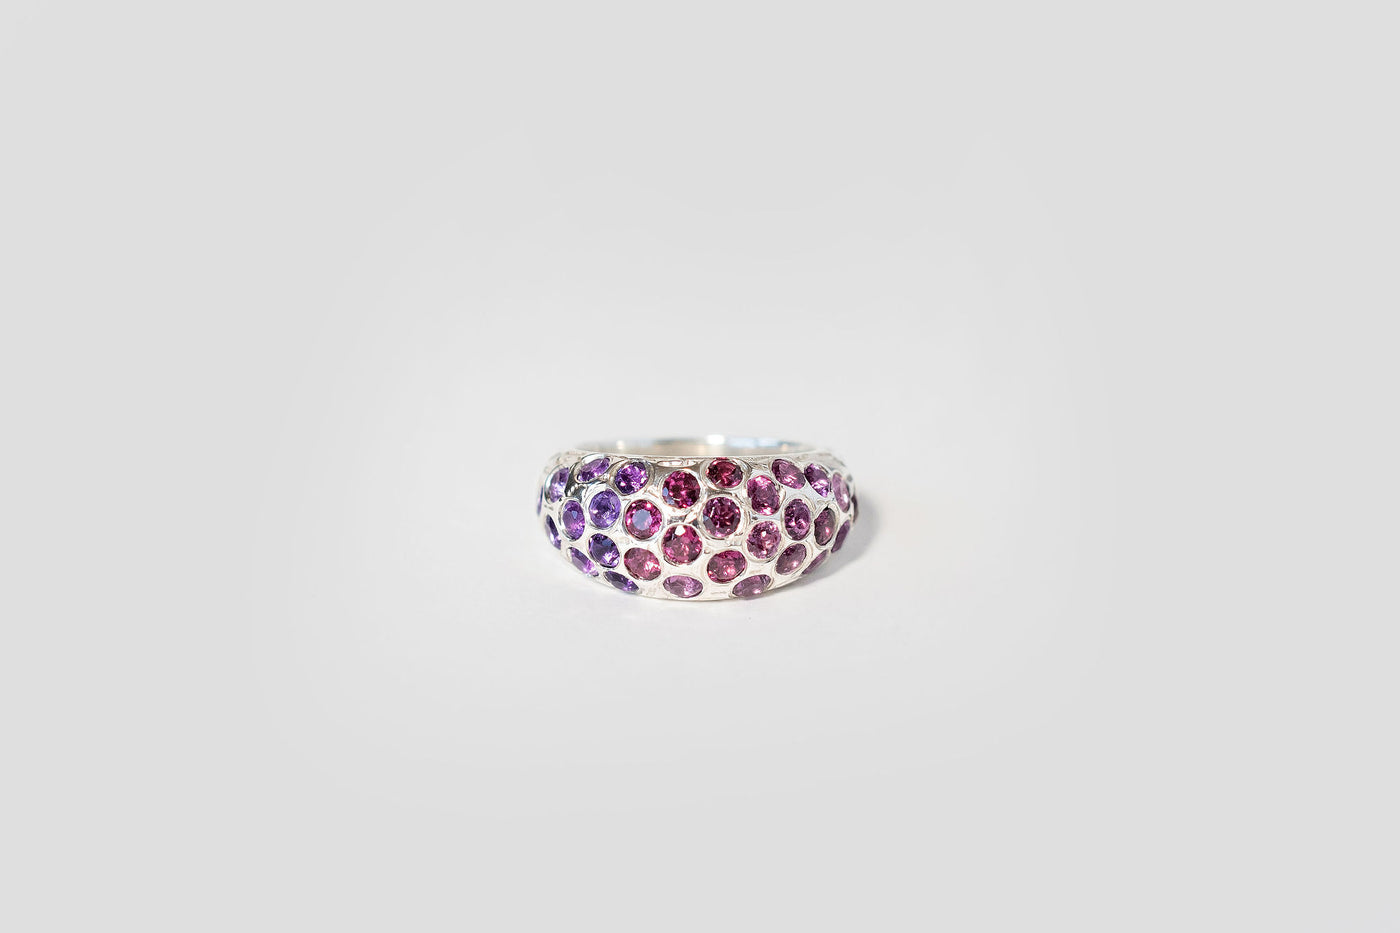 Ruby, Garnet, Amthyst Pinky Ring - Made to Order